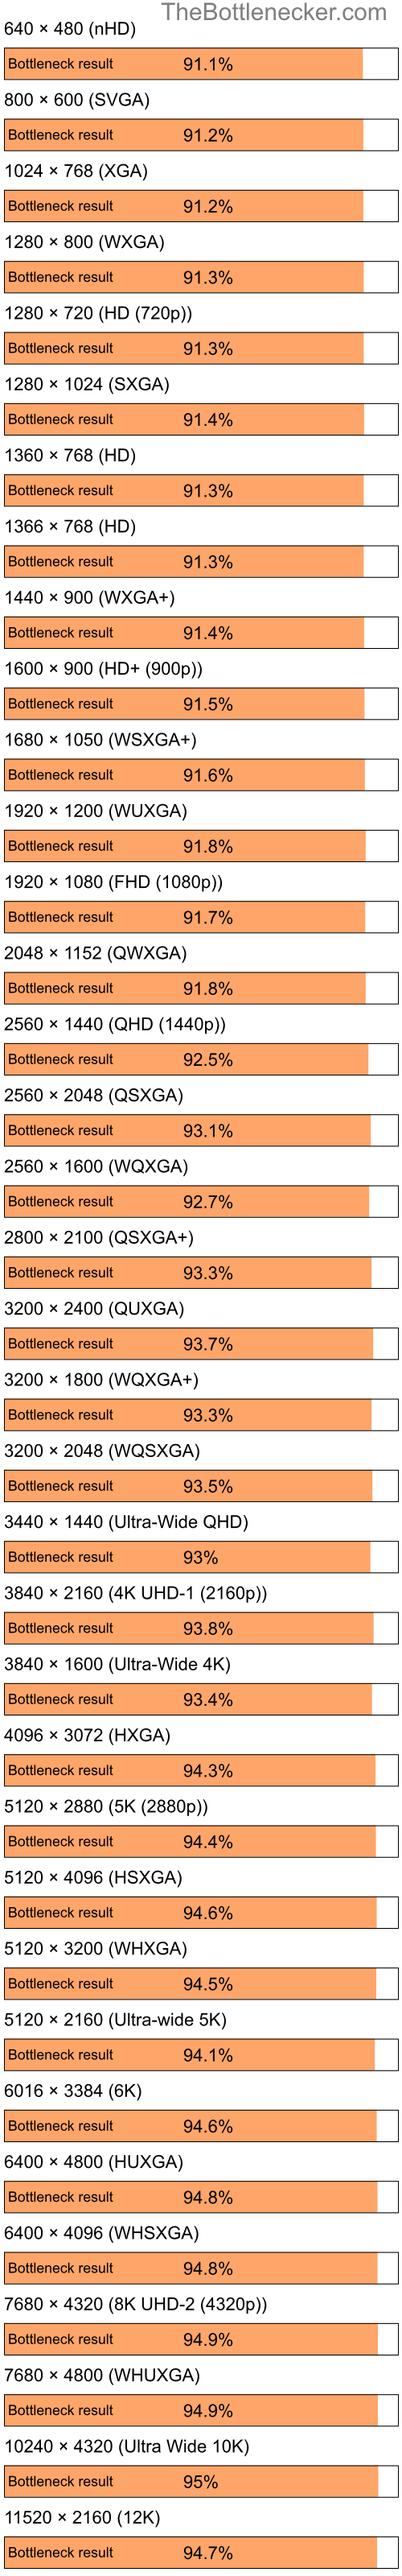 Bottleneck results by resolution for Intel Celeron and NVIDIA GeForce2 MX 100 in7 Days to Die